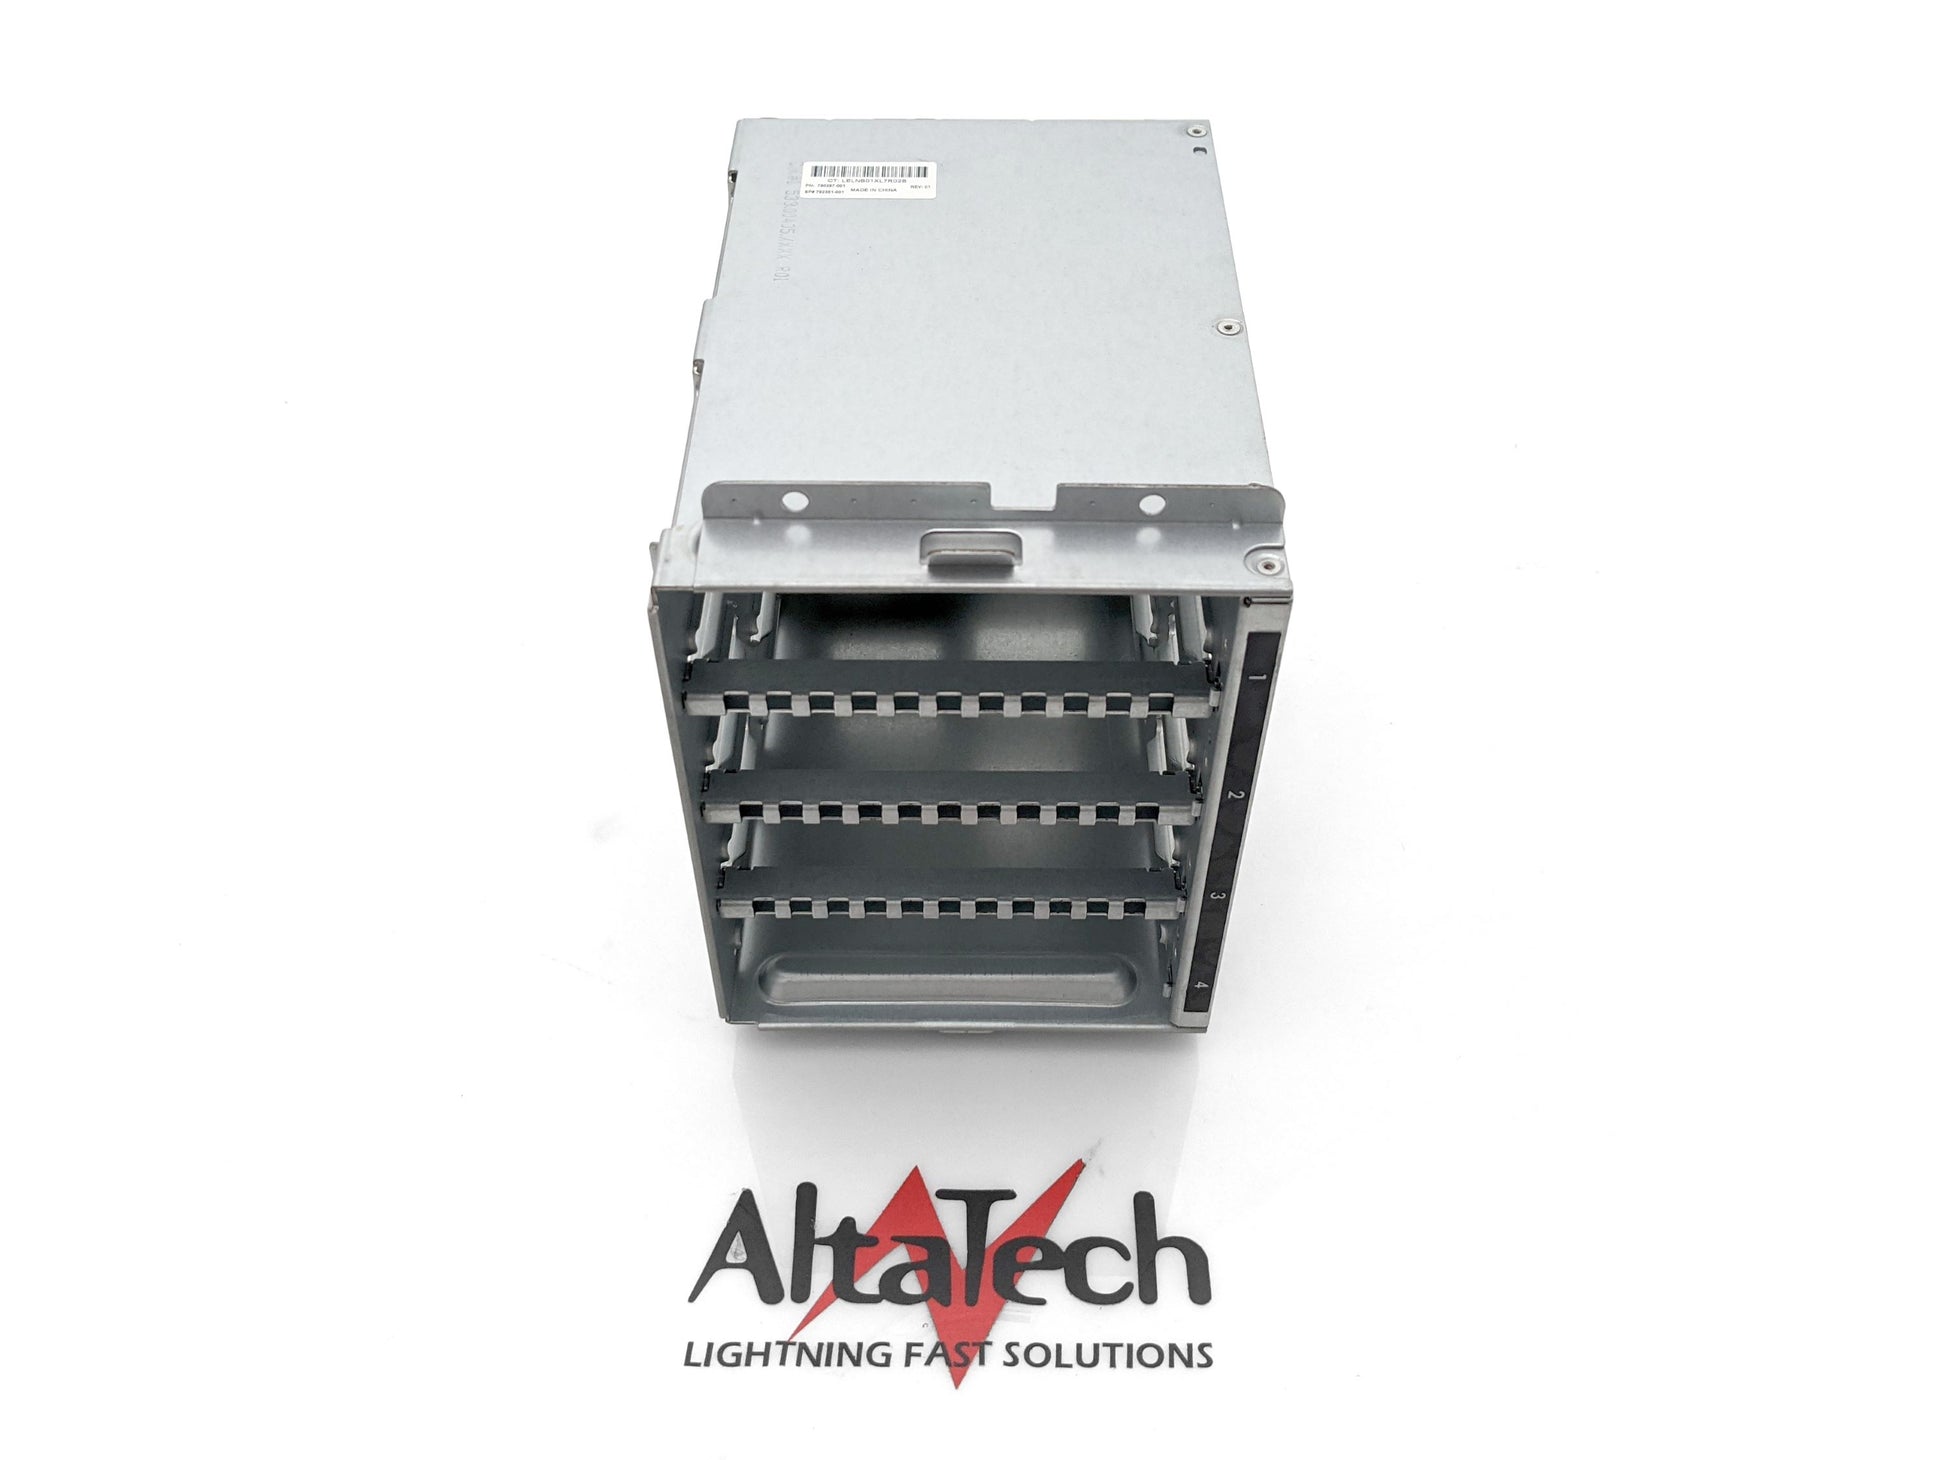 HP 792351-001 ProLiant ML 12Gbps 4x LFF Drive Cage / Backplane for ML110, ML150 Gen9, Used